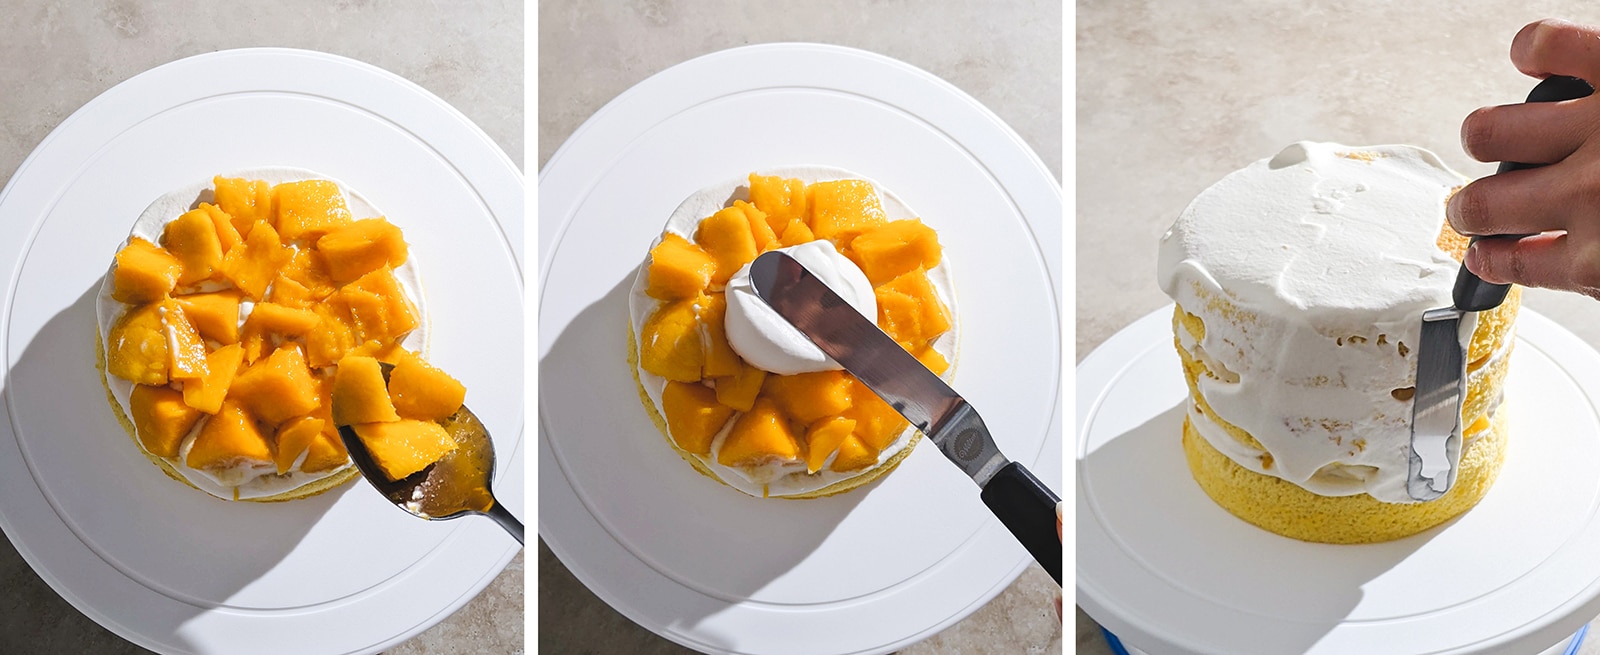 Three image collage of adding mangoes to cake layer and frosting cake with whipped cream.